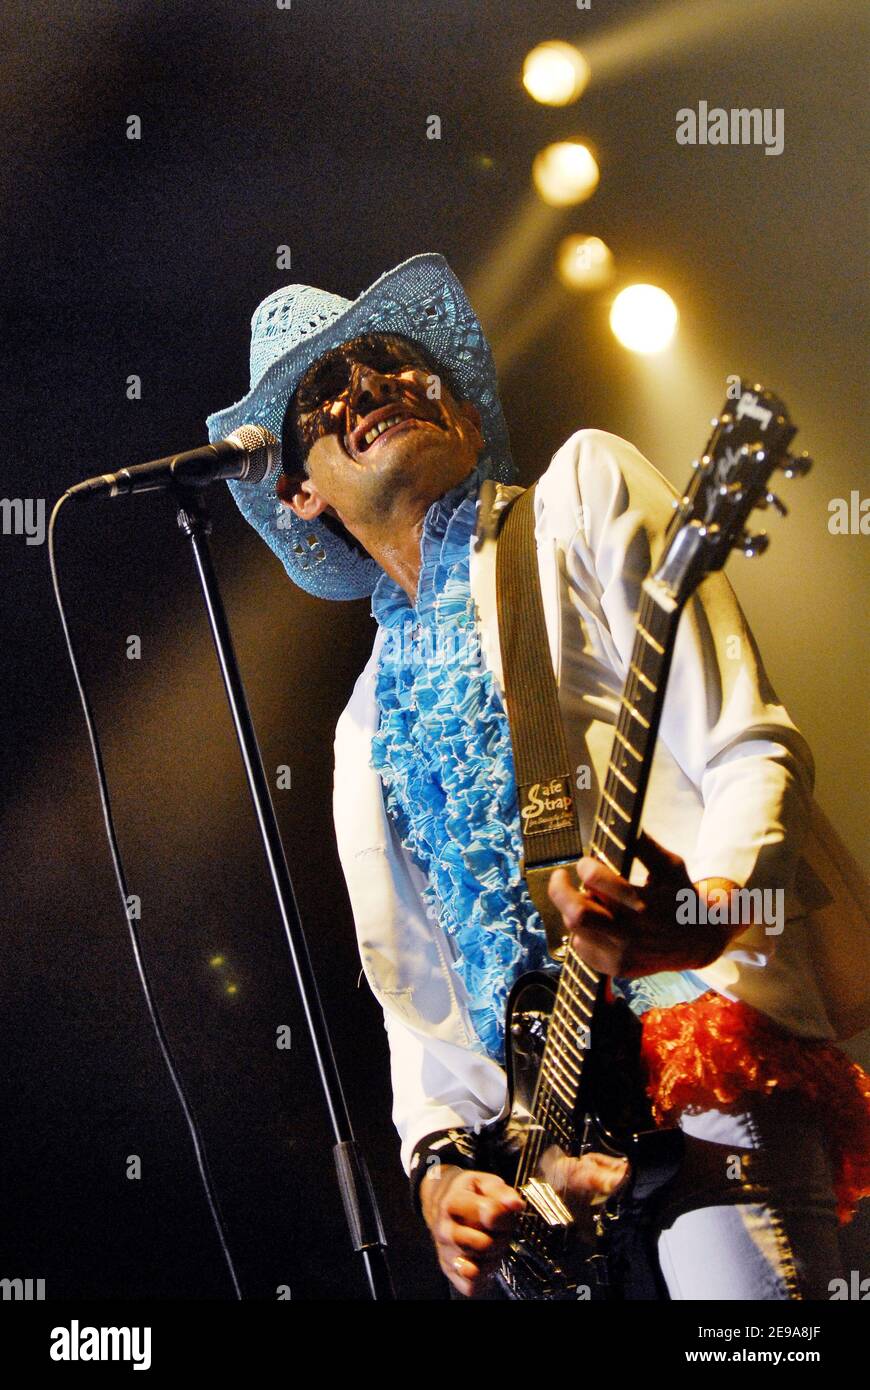 French rock band 'Les Wampas' performs live on stage at Le Zenith, in Paris, France, on May 11, 2006. Photo by Bruno Klein/ABACAPRESS.COM. Stock Photo